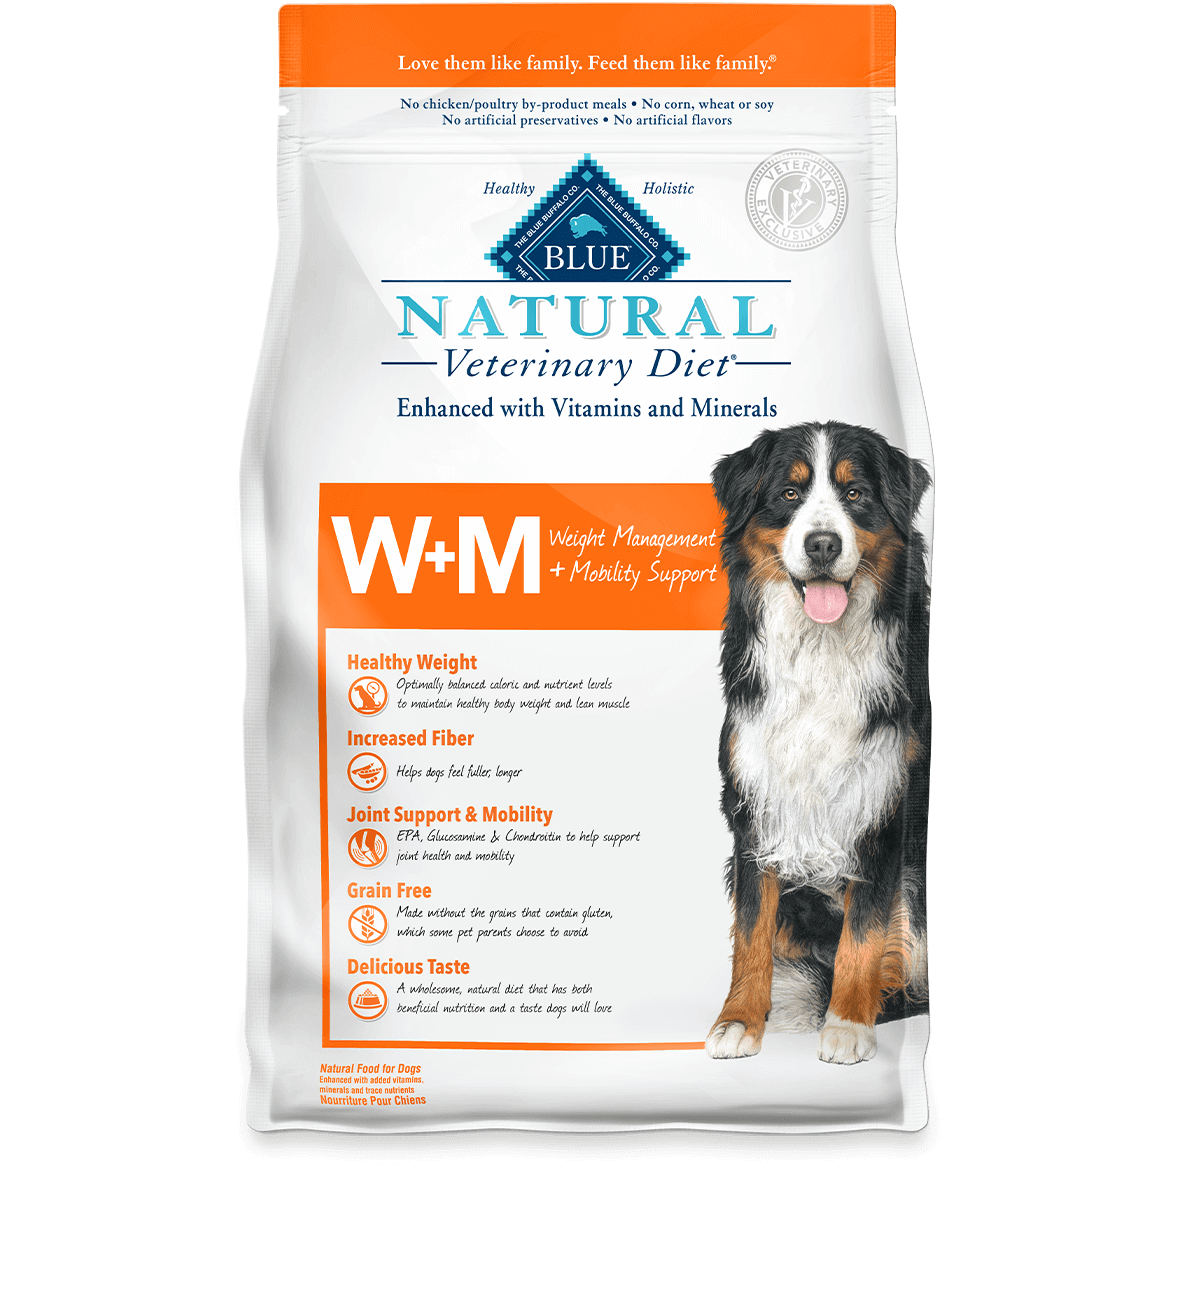 blue natural veterinary diet w+m weight management + mobility support dog dry food